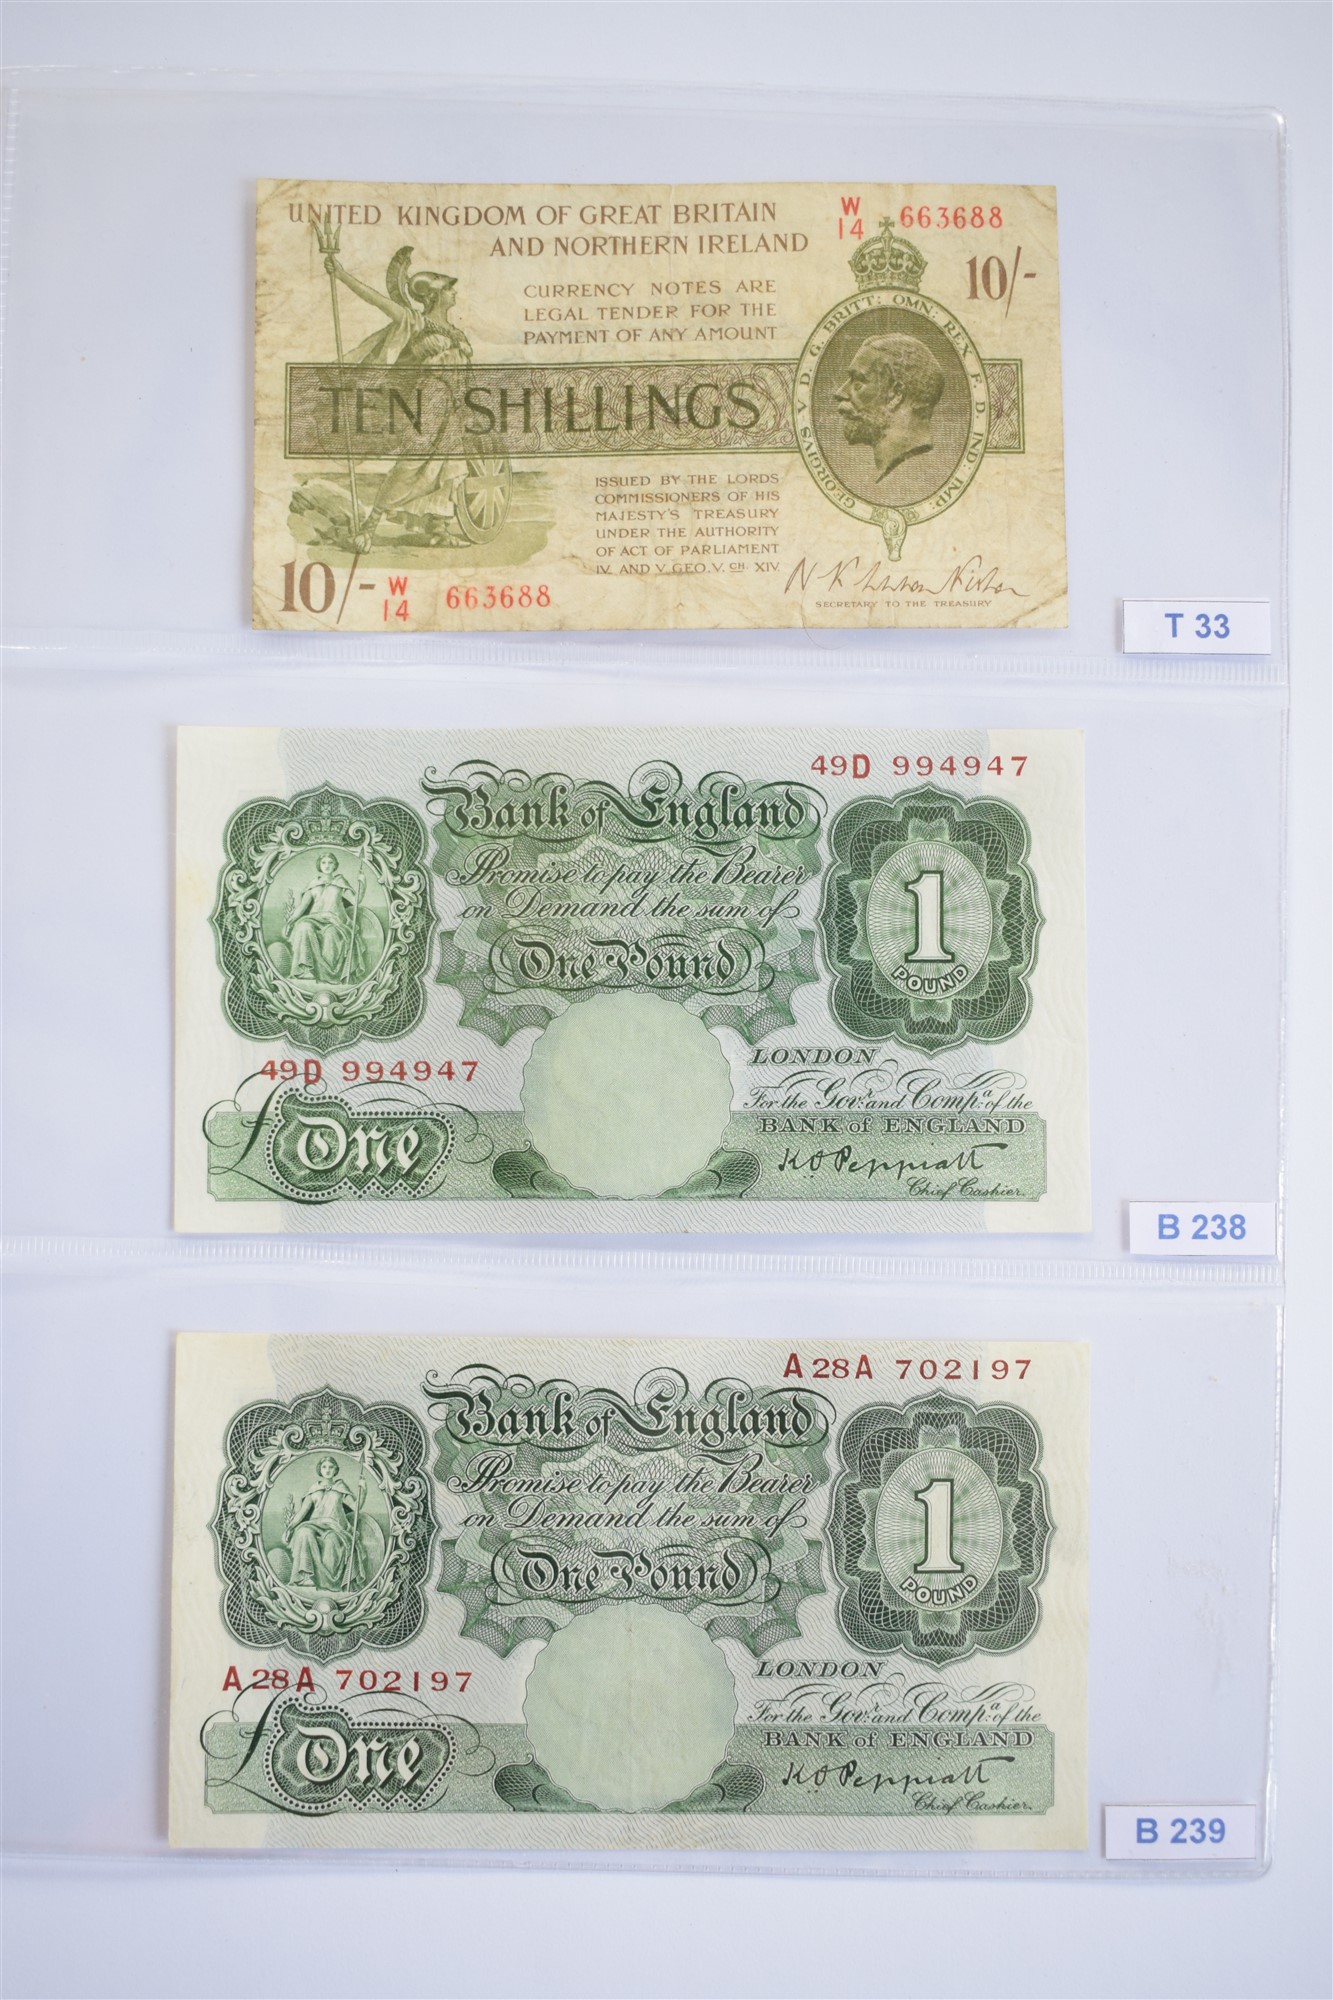 Two albums of British banknotes. - Image 2 of 3